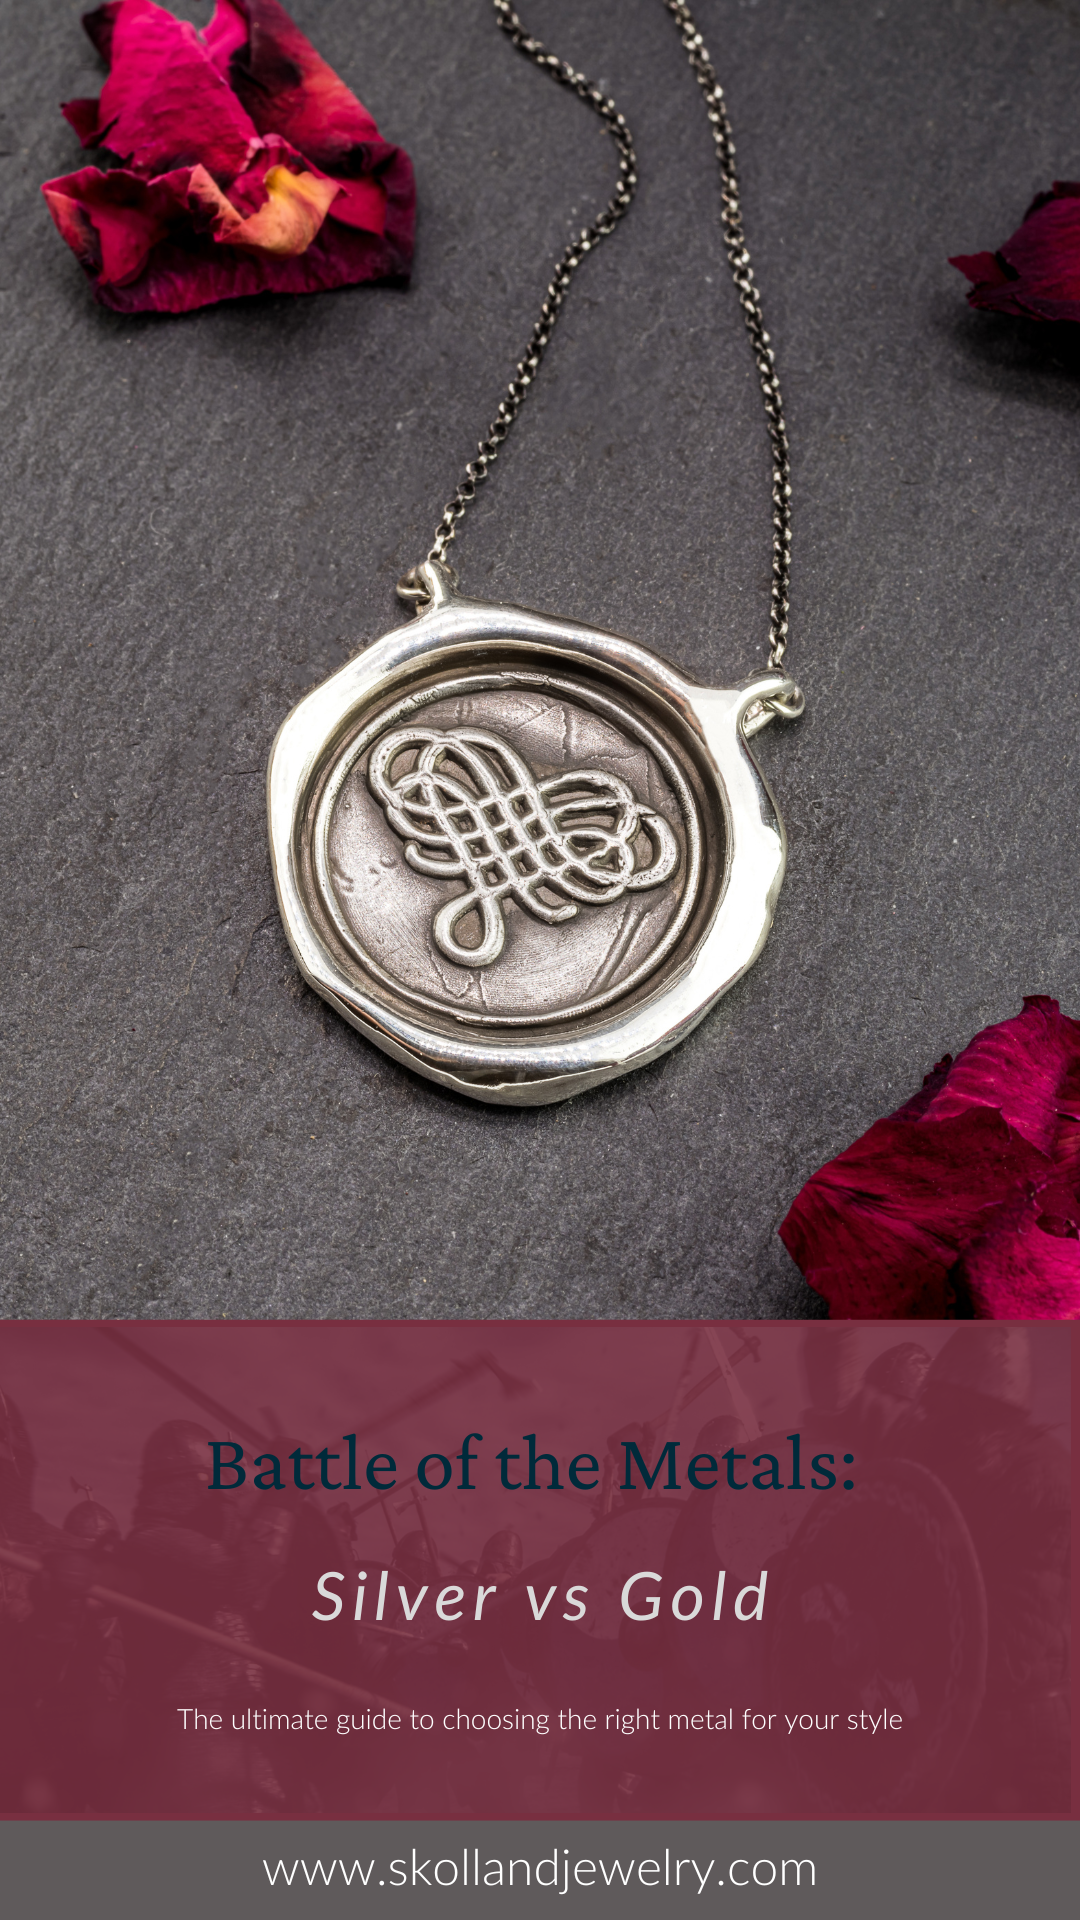 The Battle of the Metals: Silver vs Gold: The ultimate guide to choosing the right metal for your style